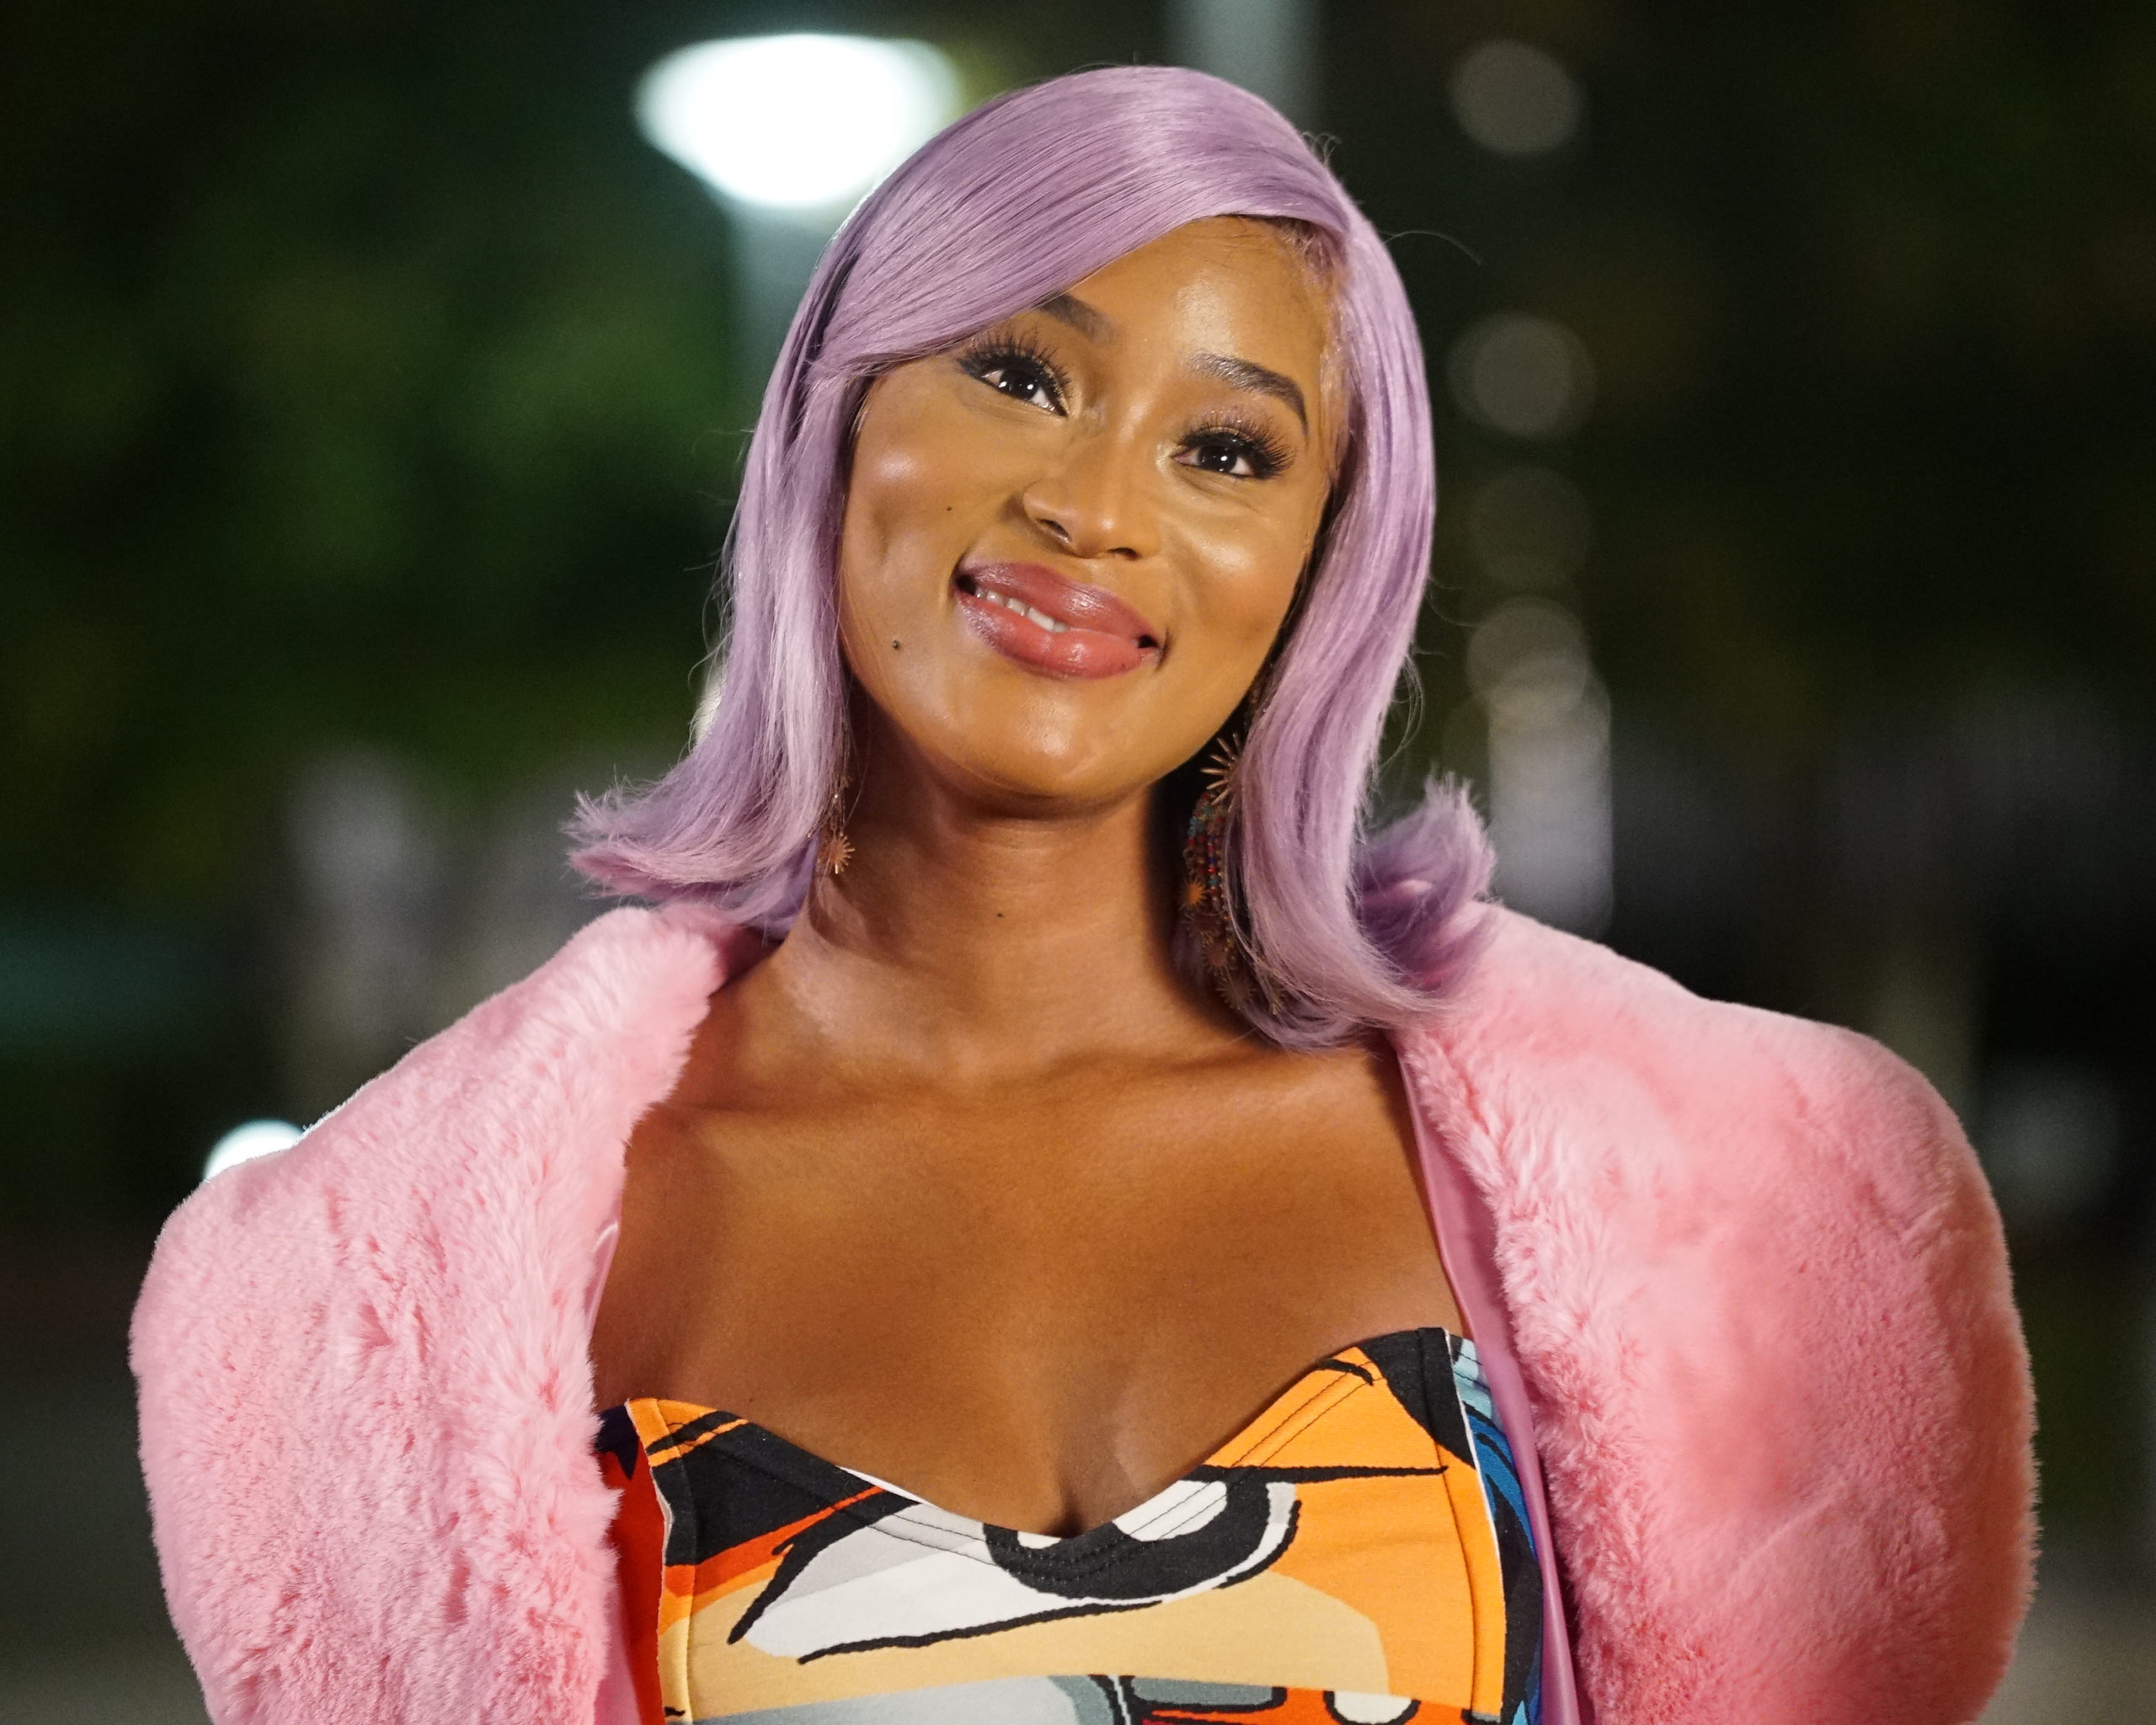 Queens: Pepi Sonuga On Her Character Lauren AKA Lil Muffin And The Relatability Of The Series [Exclusive Interview]